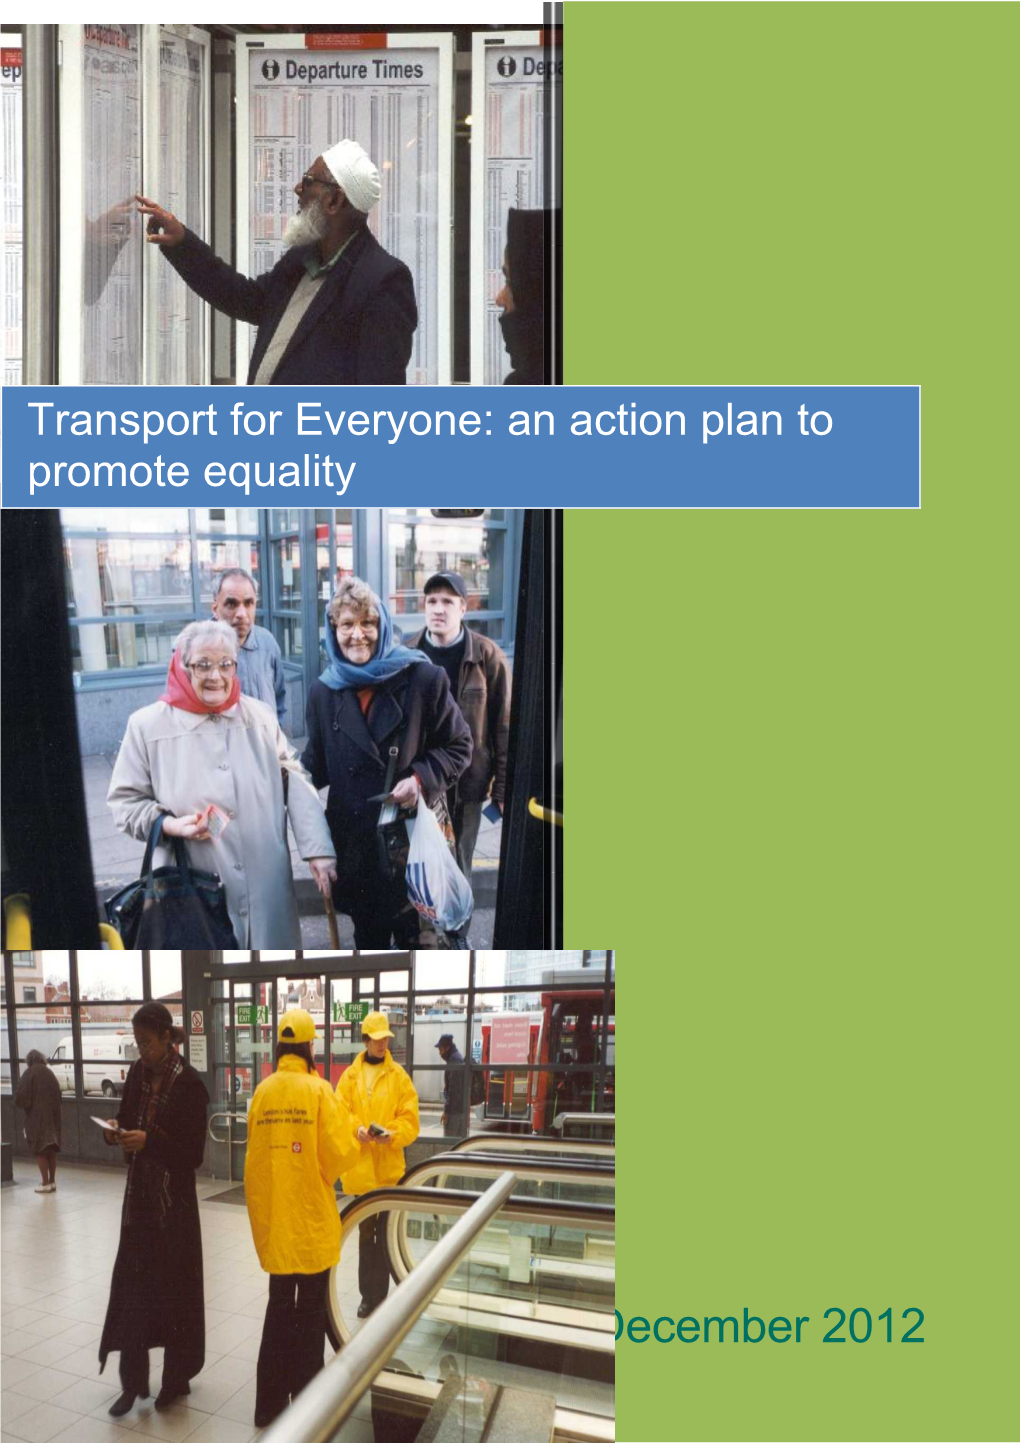 Transport for Everyone: an Action Plan to Promote Equality